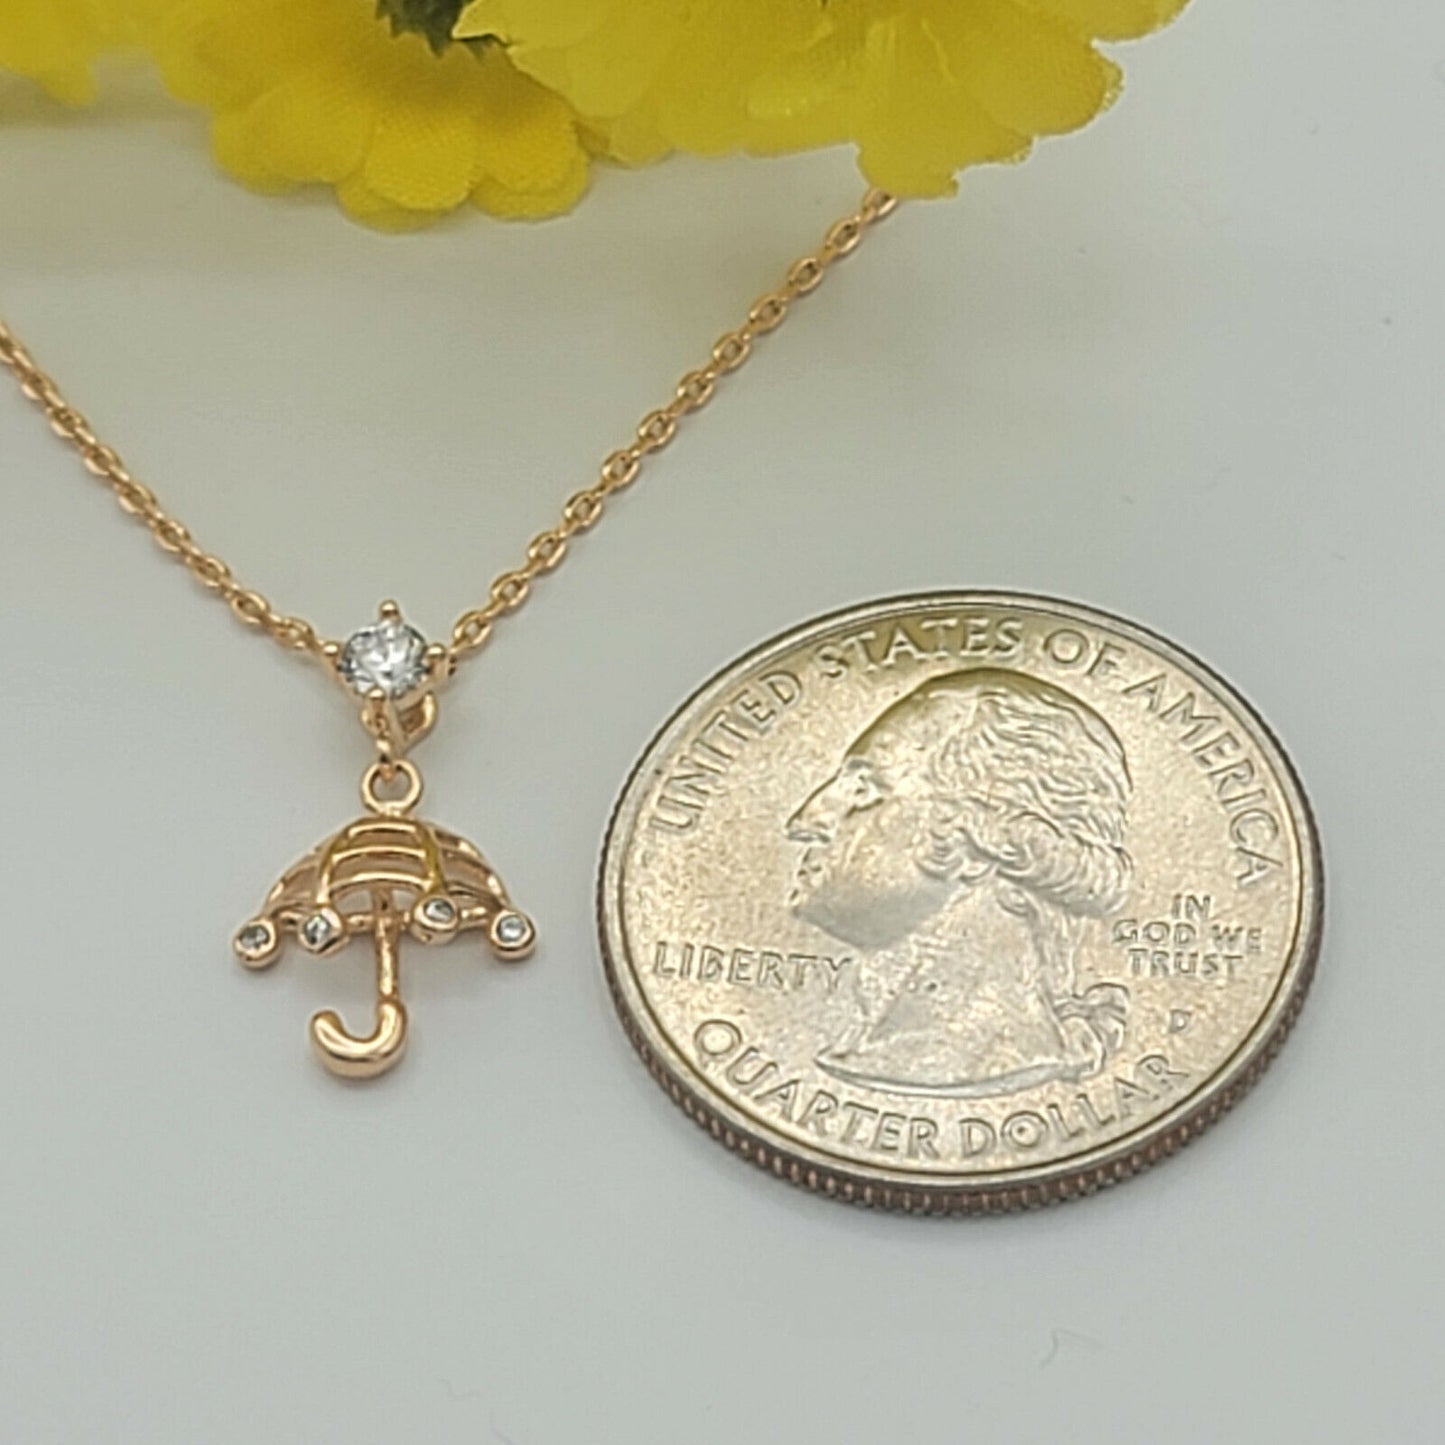 Necklaces - 18K Gold Plated. Mary Poppins Small CZ Umbrella Pendant & Chain.